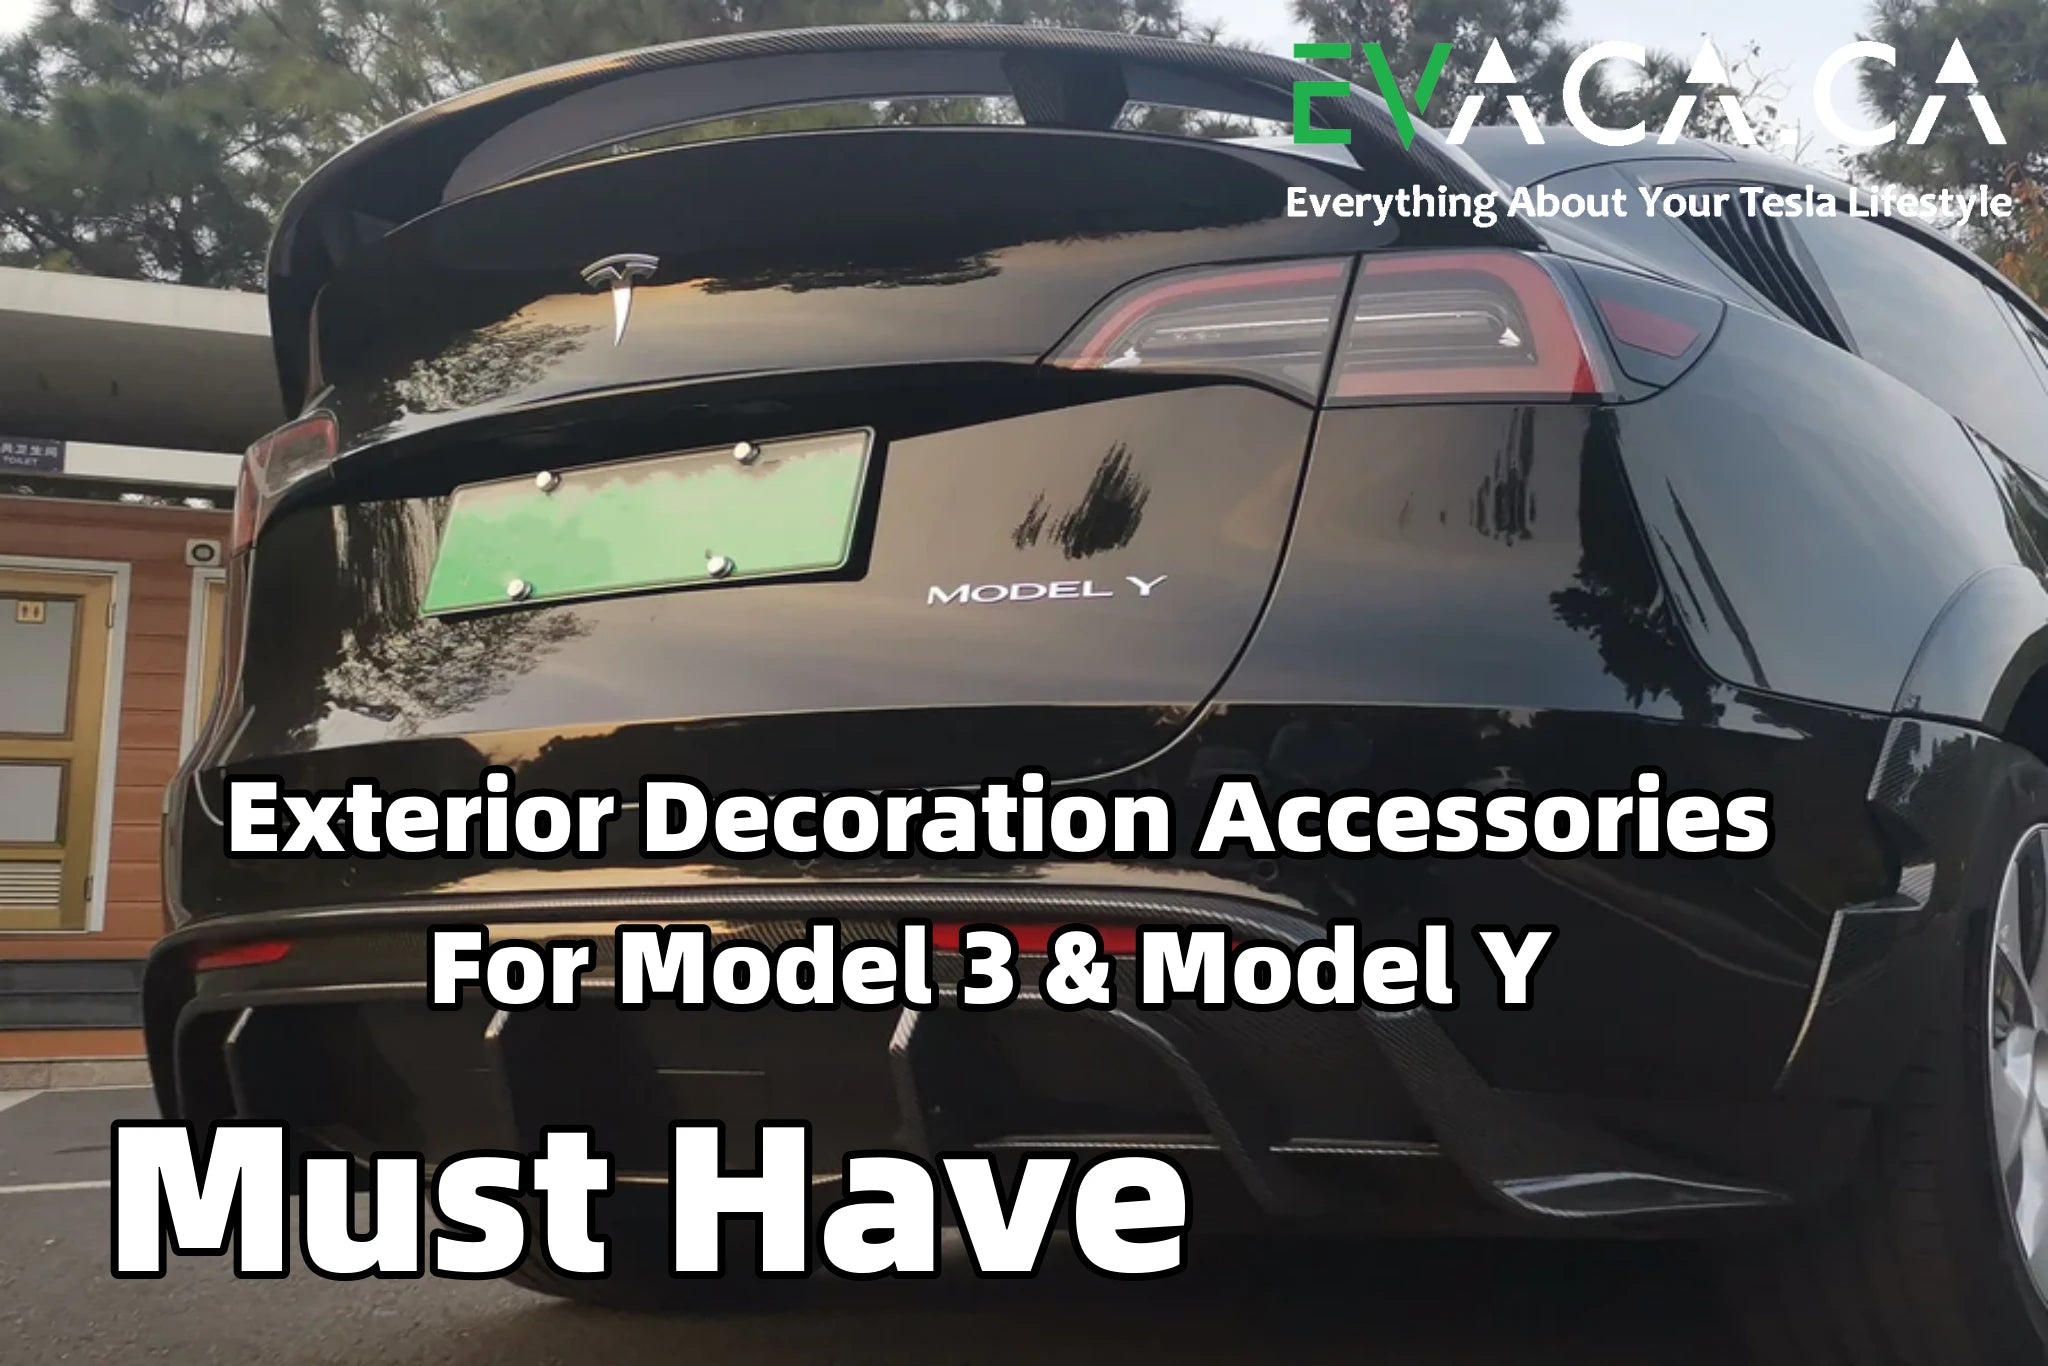 Must-Have Exterior Decoration Accessories for Tesla Model 3